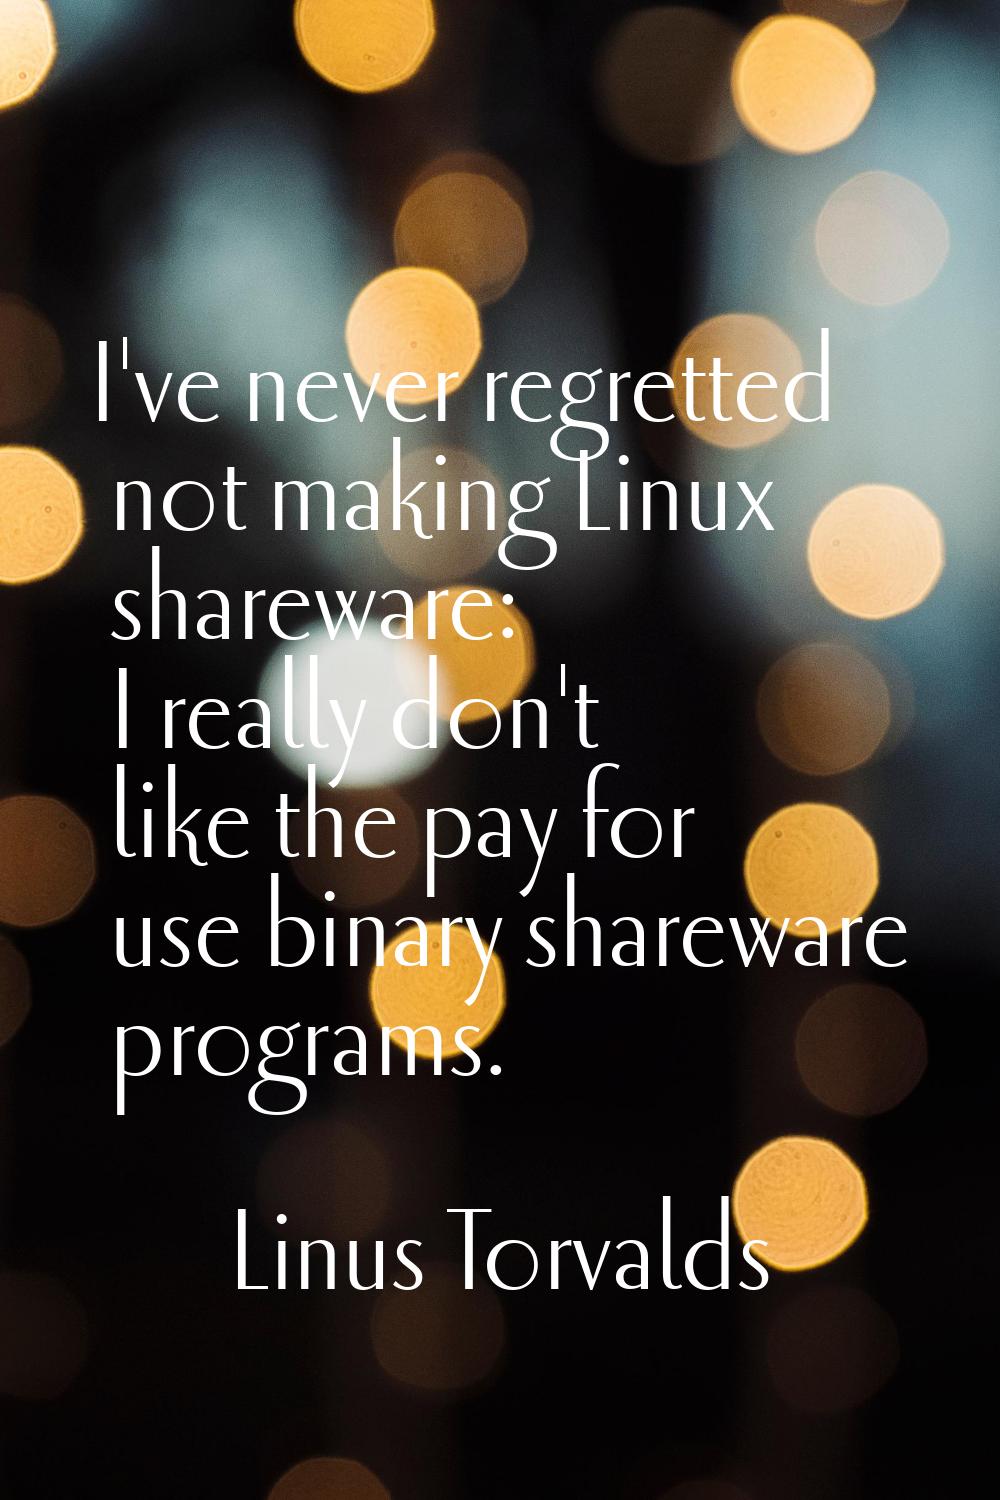 I've never regretted not making Linux shareware: I really don't like the pay for use binary sharewa